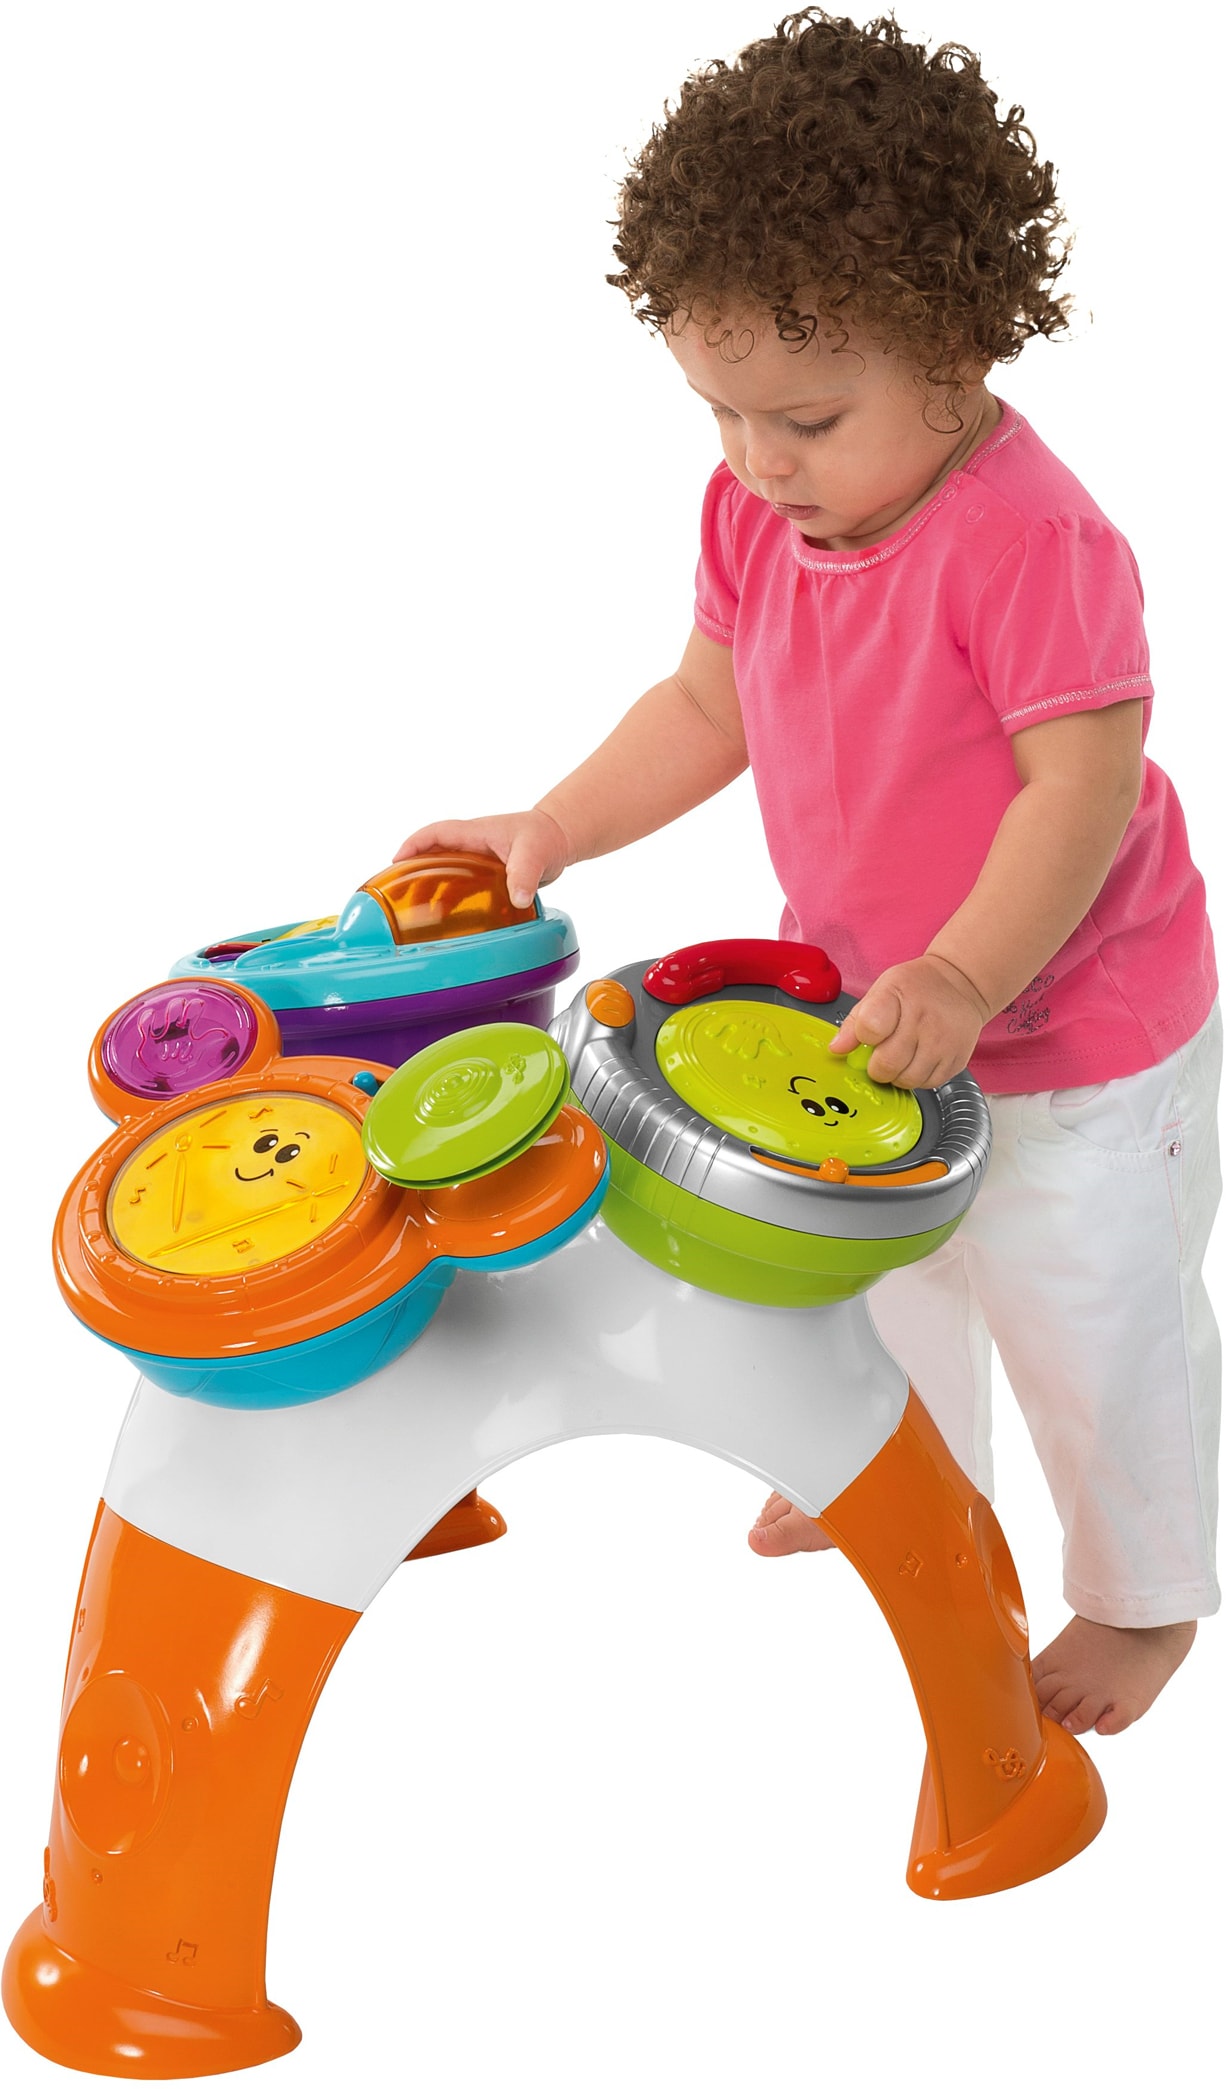 Table musicale CHICCO Table DJ Mix Baby Pas Cher 